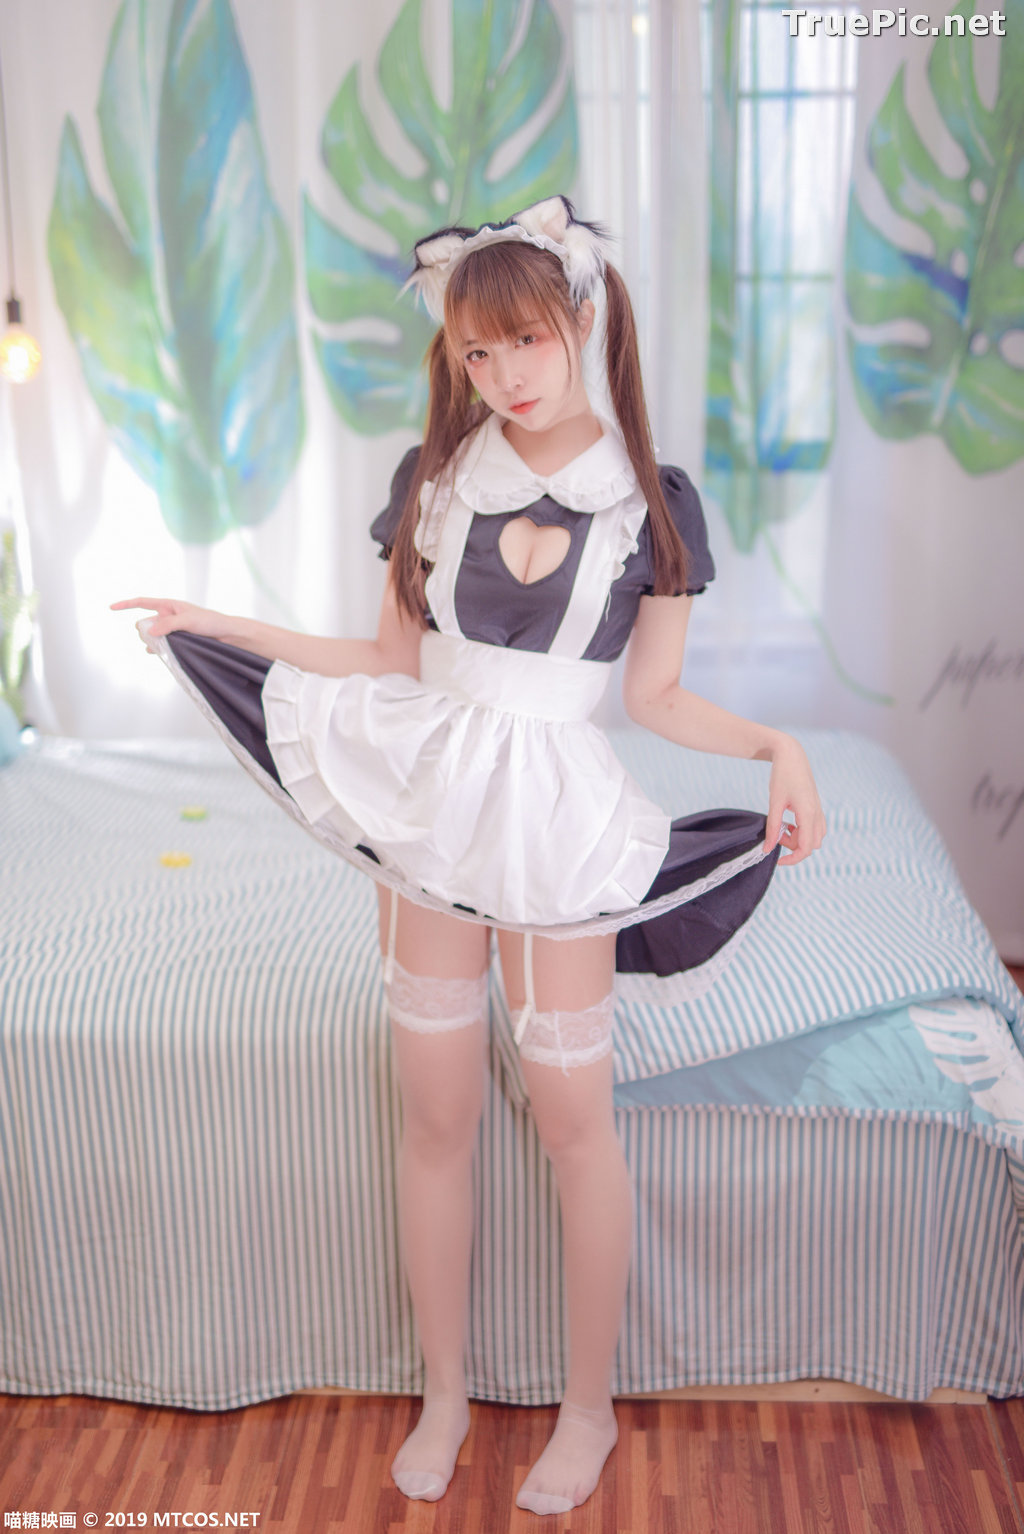 Image [MTCos] 喵糖映画 Vol.049 - Chinese Cute Model - Lovely Maid Cat - TruePic.net - Picture-29